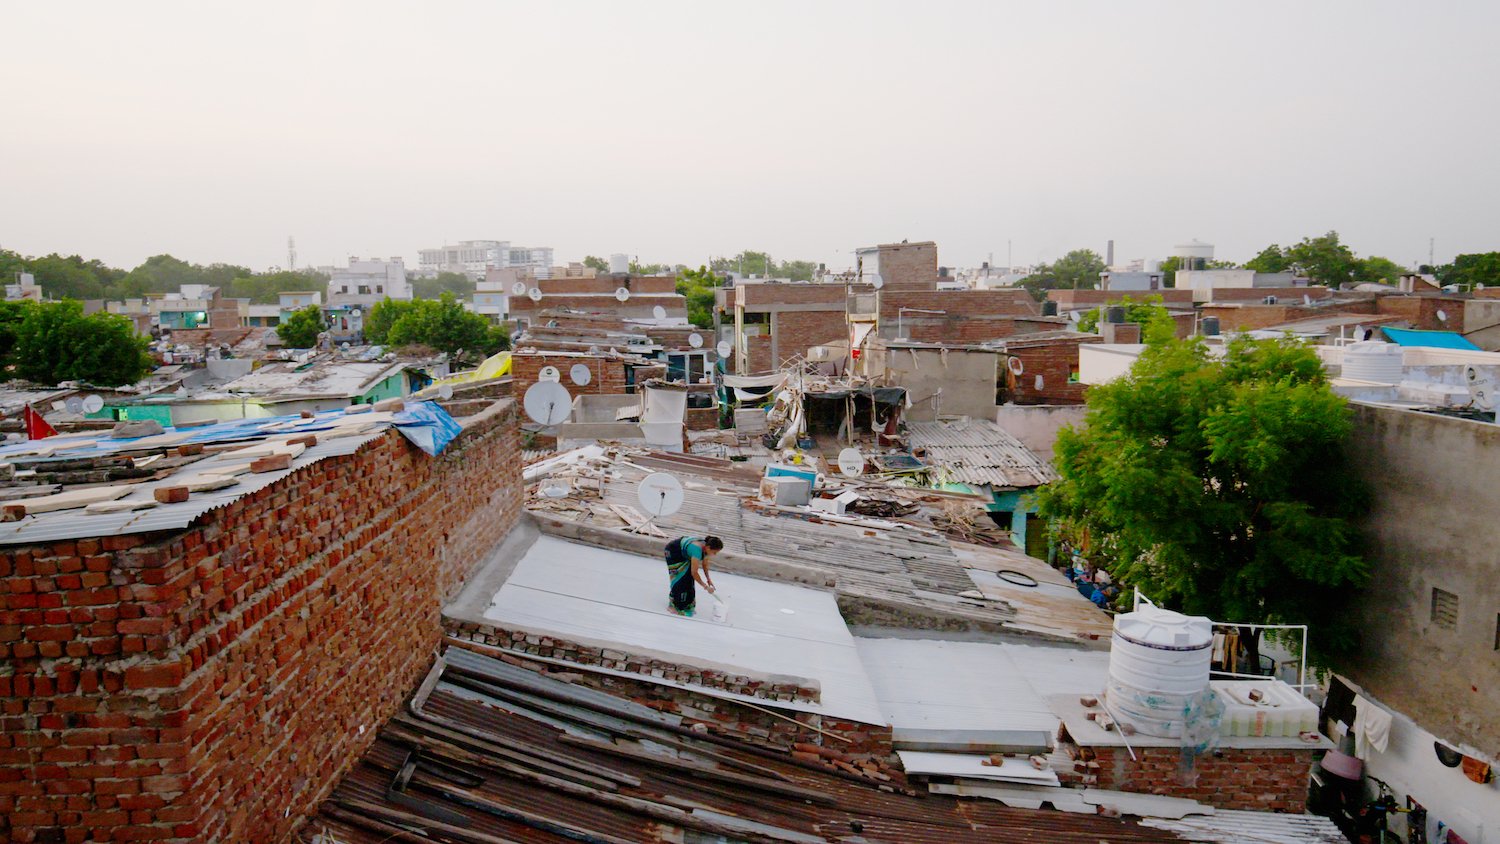 A roof in Ahmedabad being painted with solar-reflective paint as a sustainable cooling solution